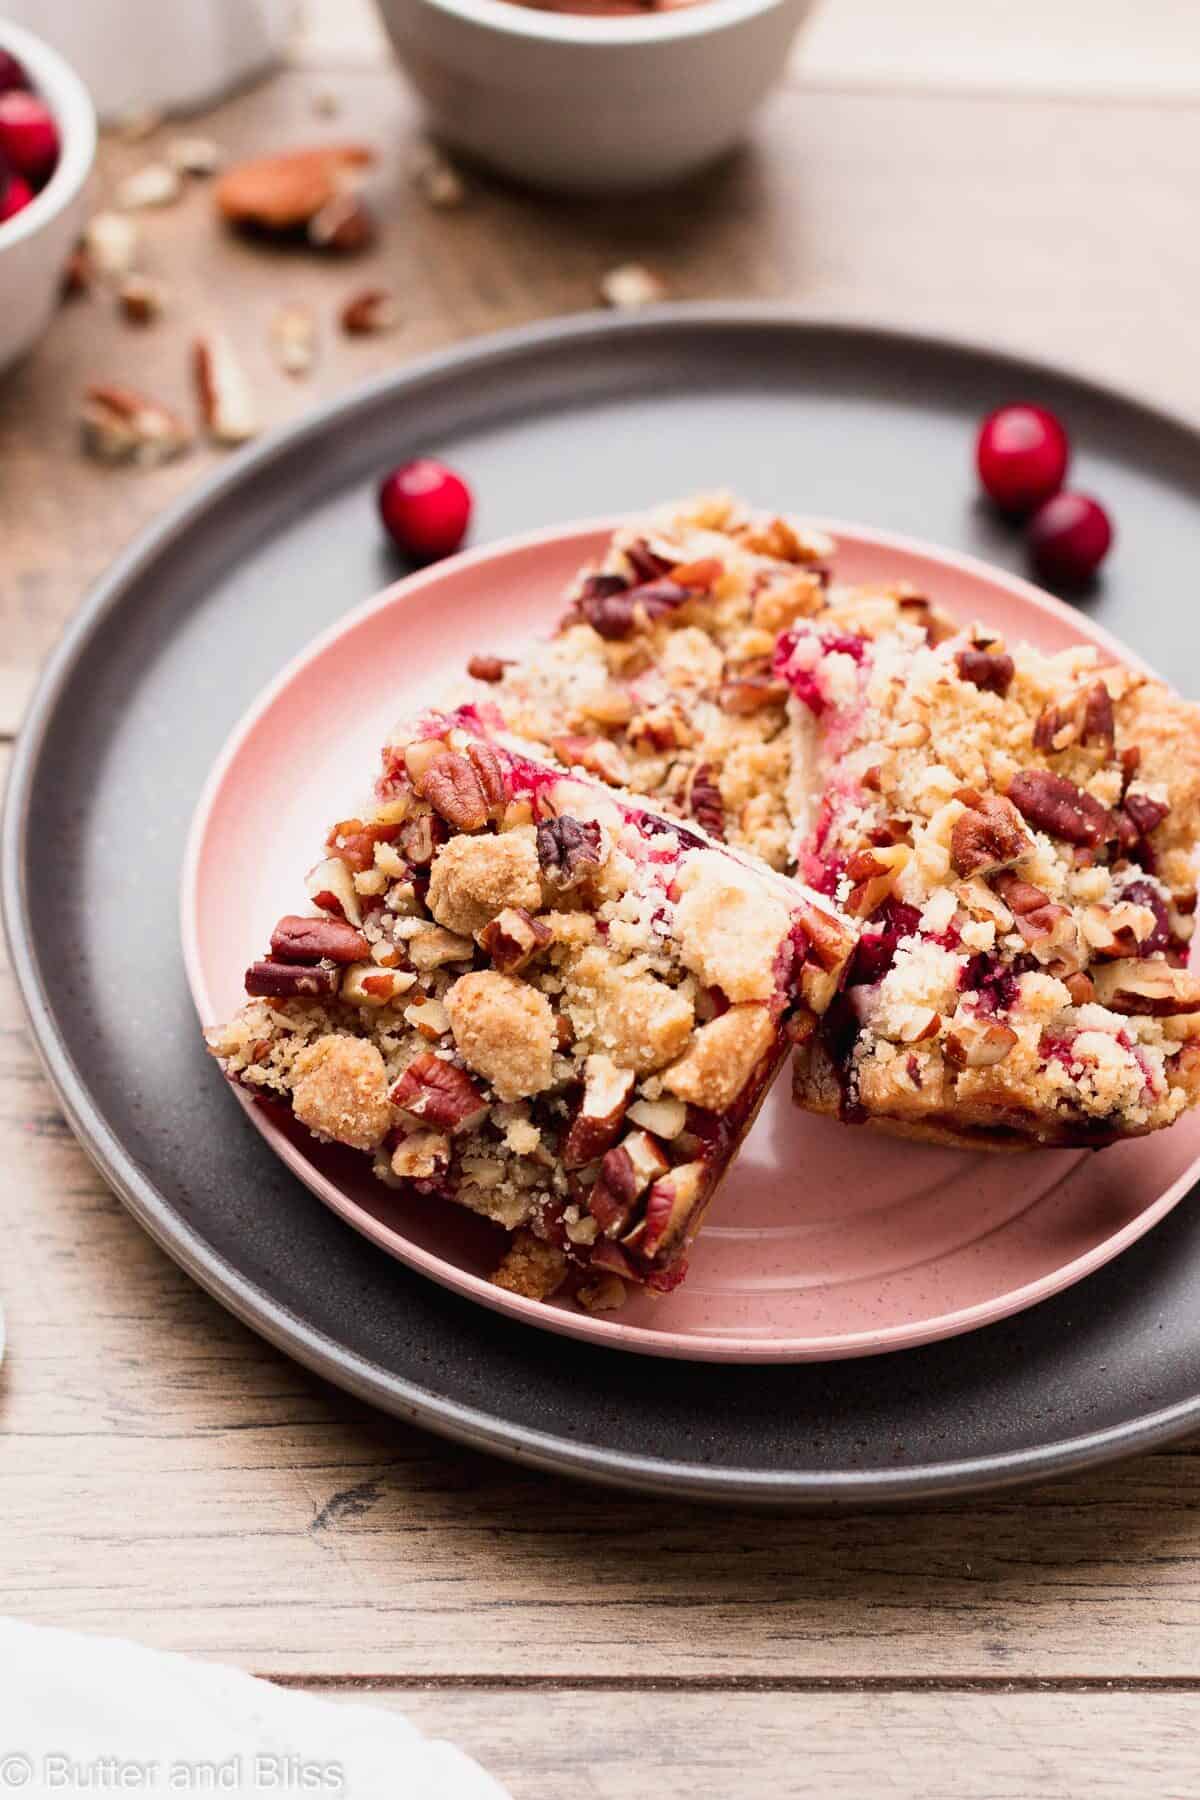 Plate of cranberry bars with nut crumble